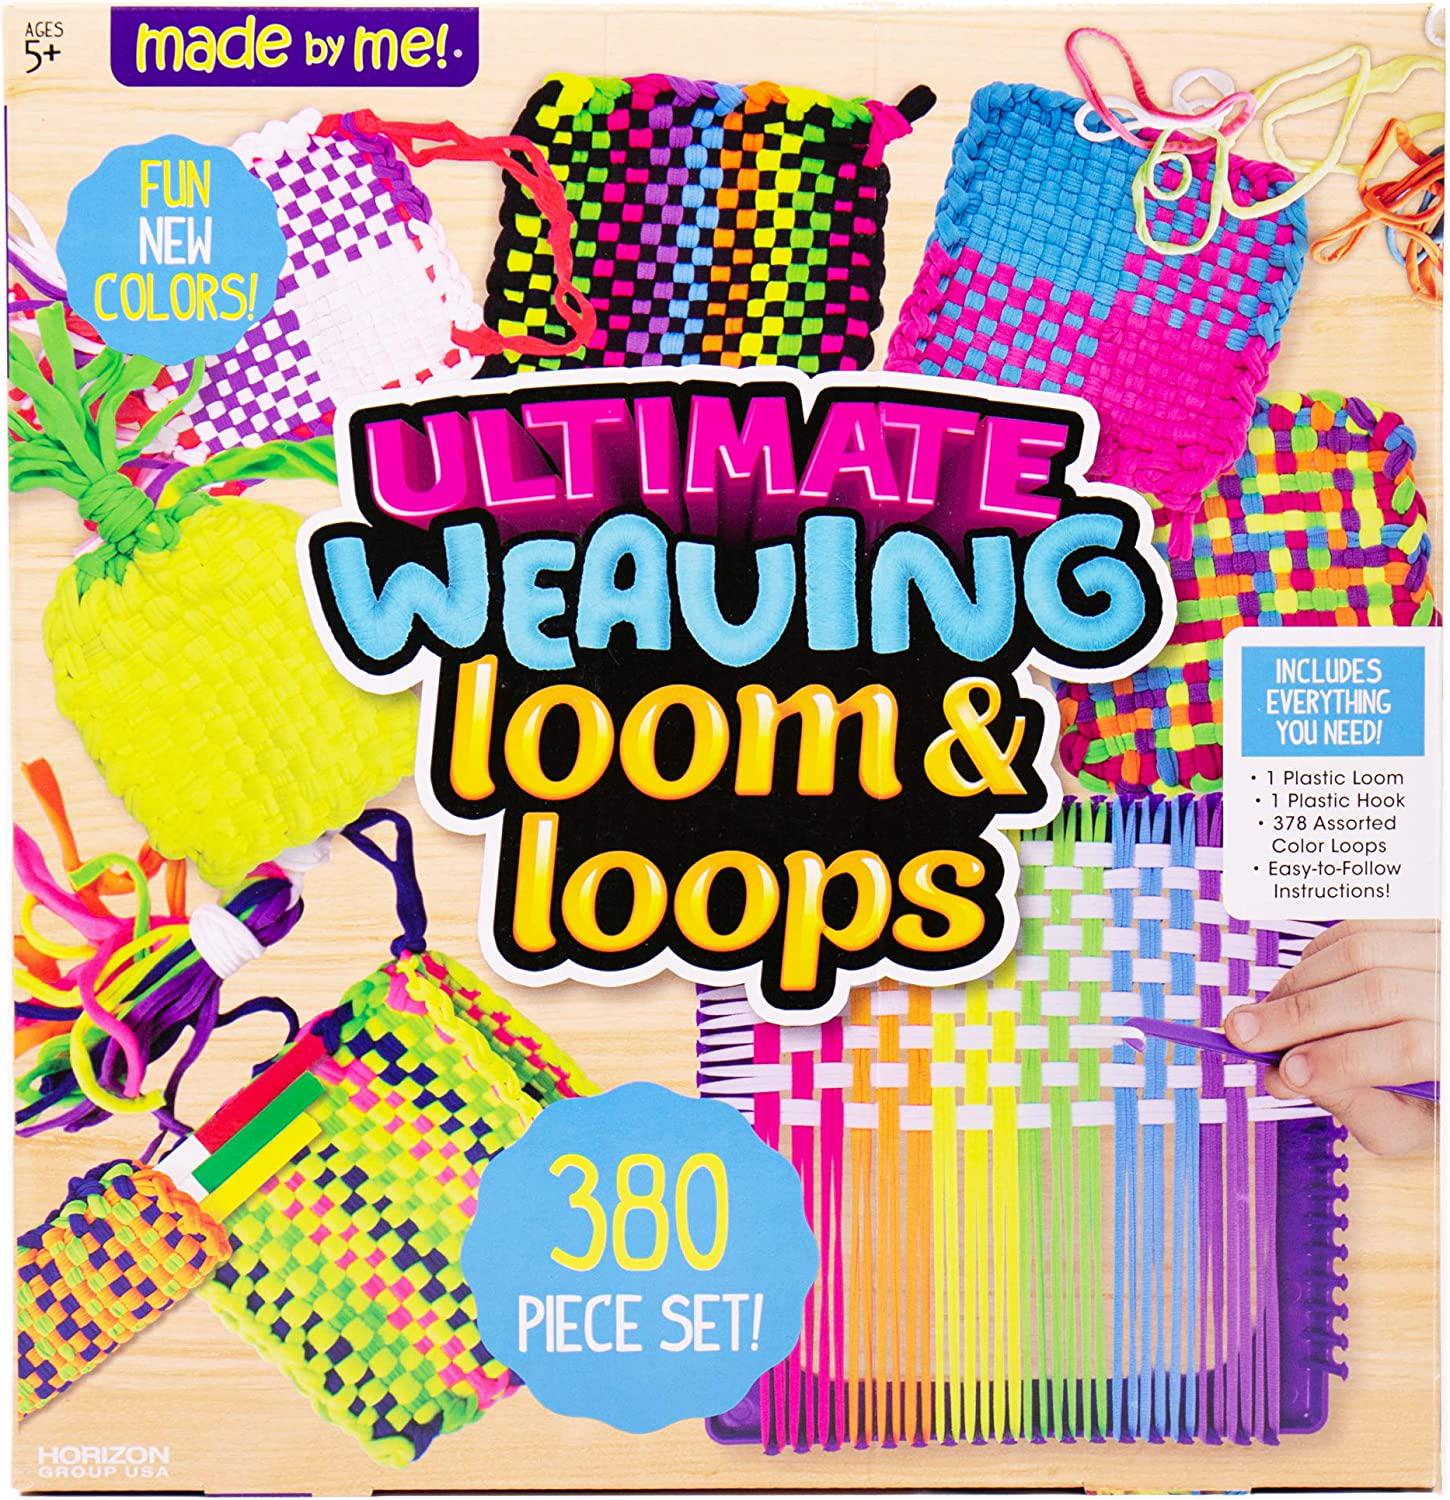 Made By Me, Made By Me 93352 Ultimate Weaving Loom by Horizon Group USA, Includes Over 360 Craft Loops and 1 Weaving Loom ( Exclusive), Multicolor